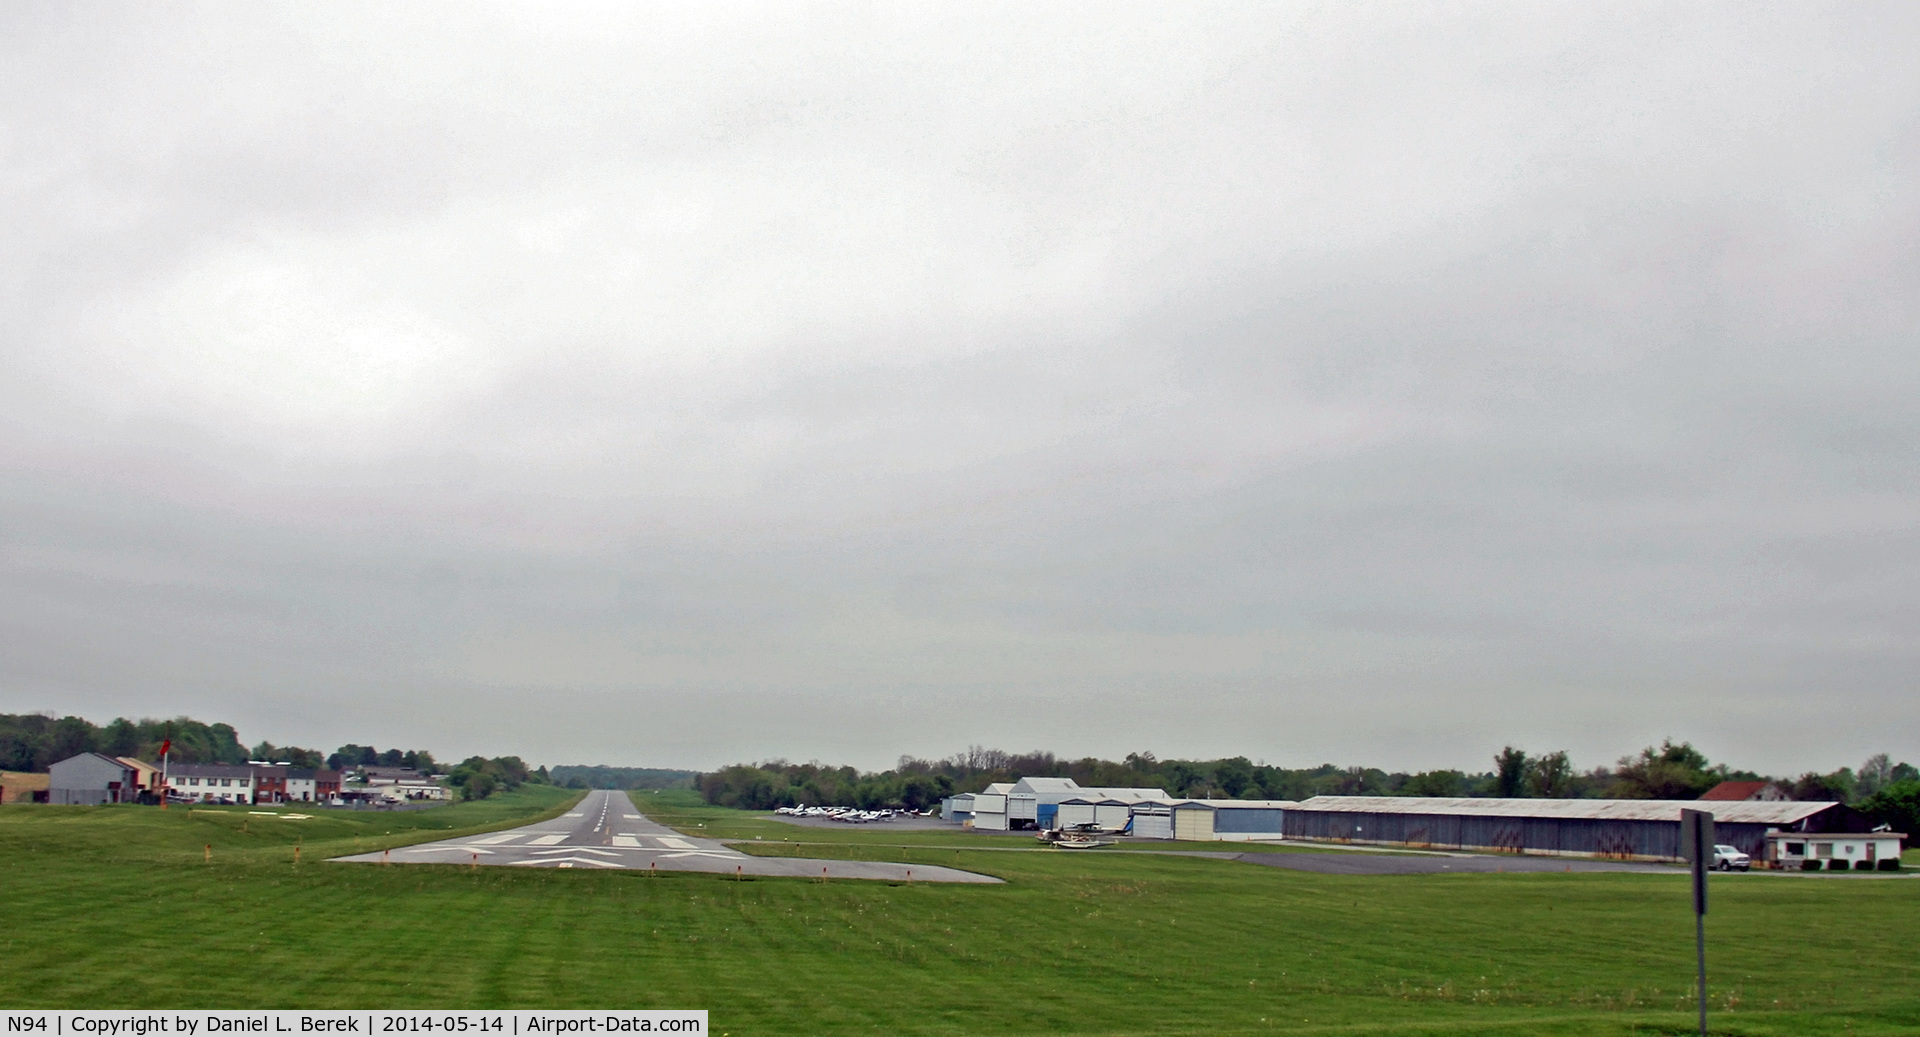 Carlisle Airport (N94) - Panoramic view of the airport, looking west, at the threshold of the main runway.